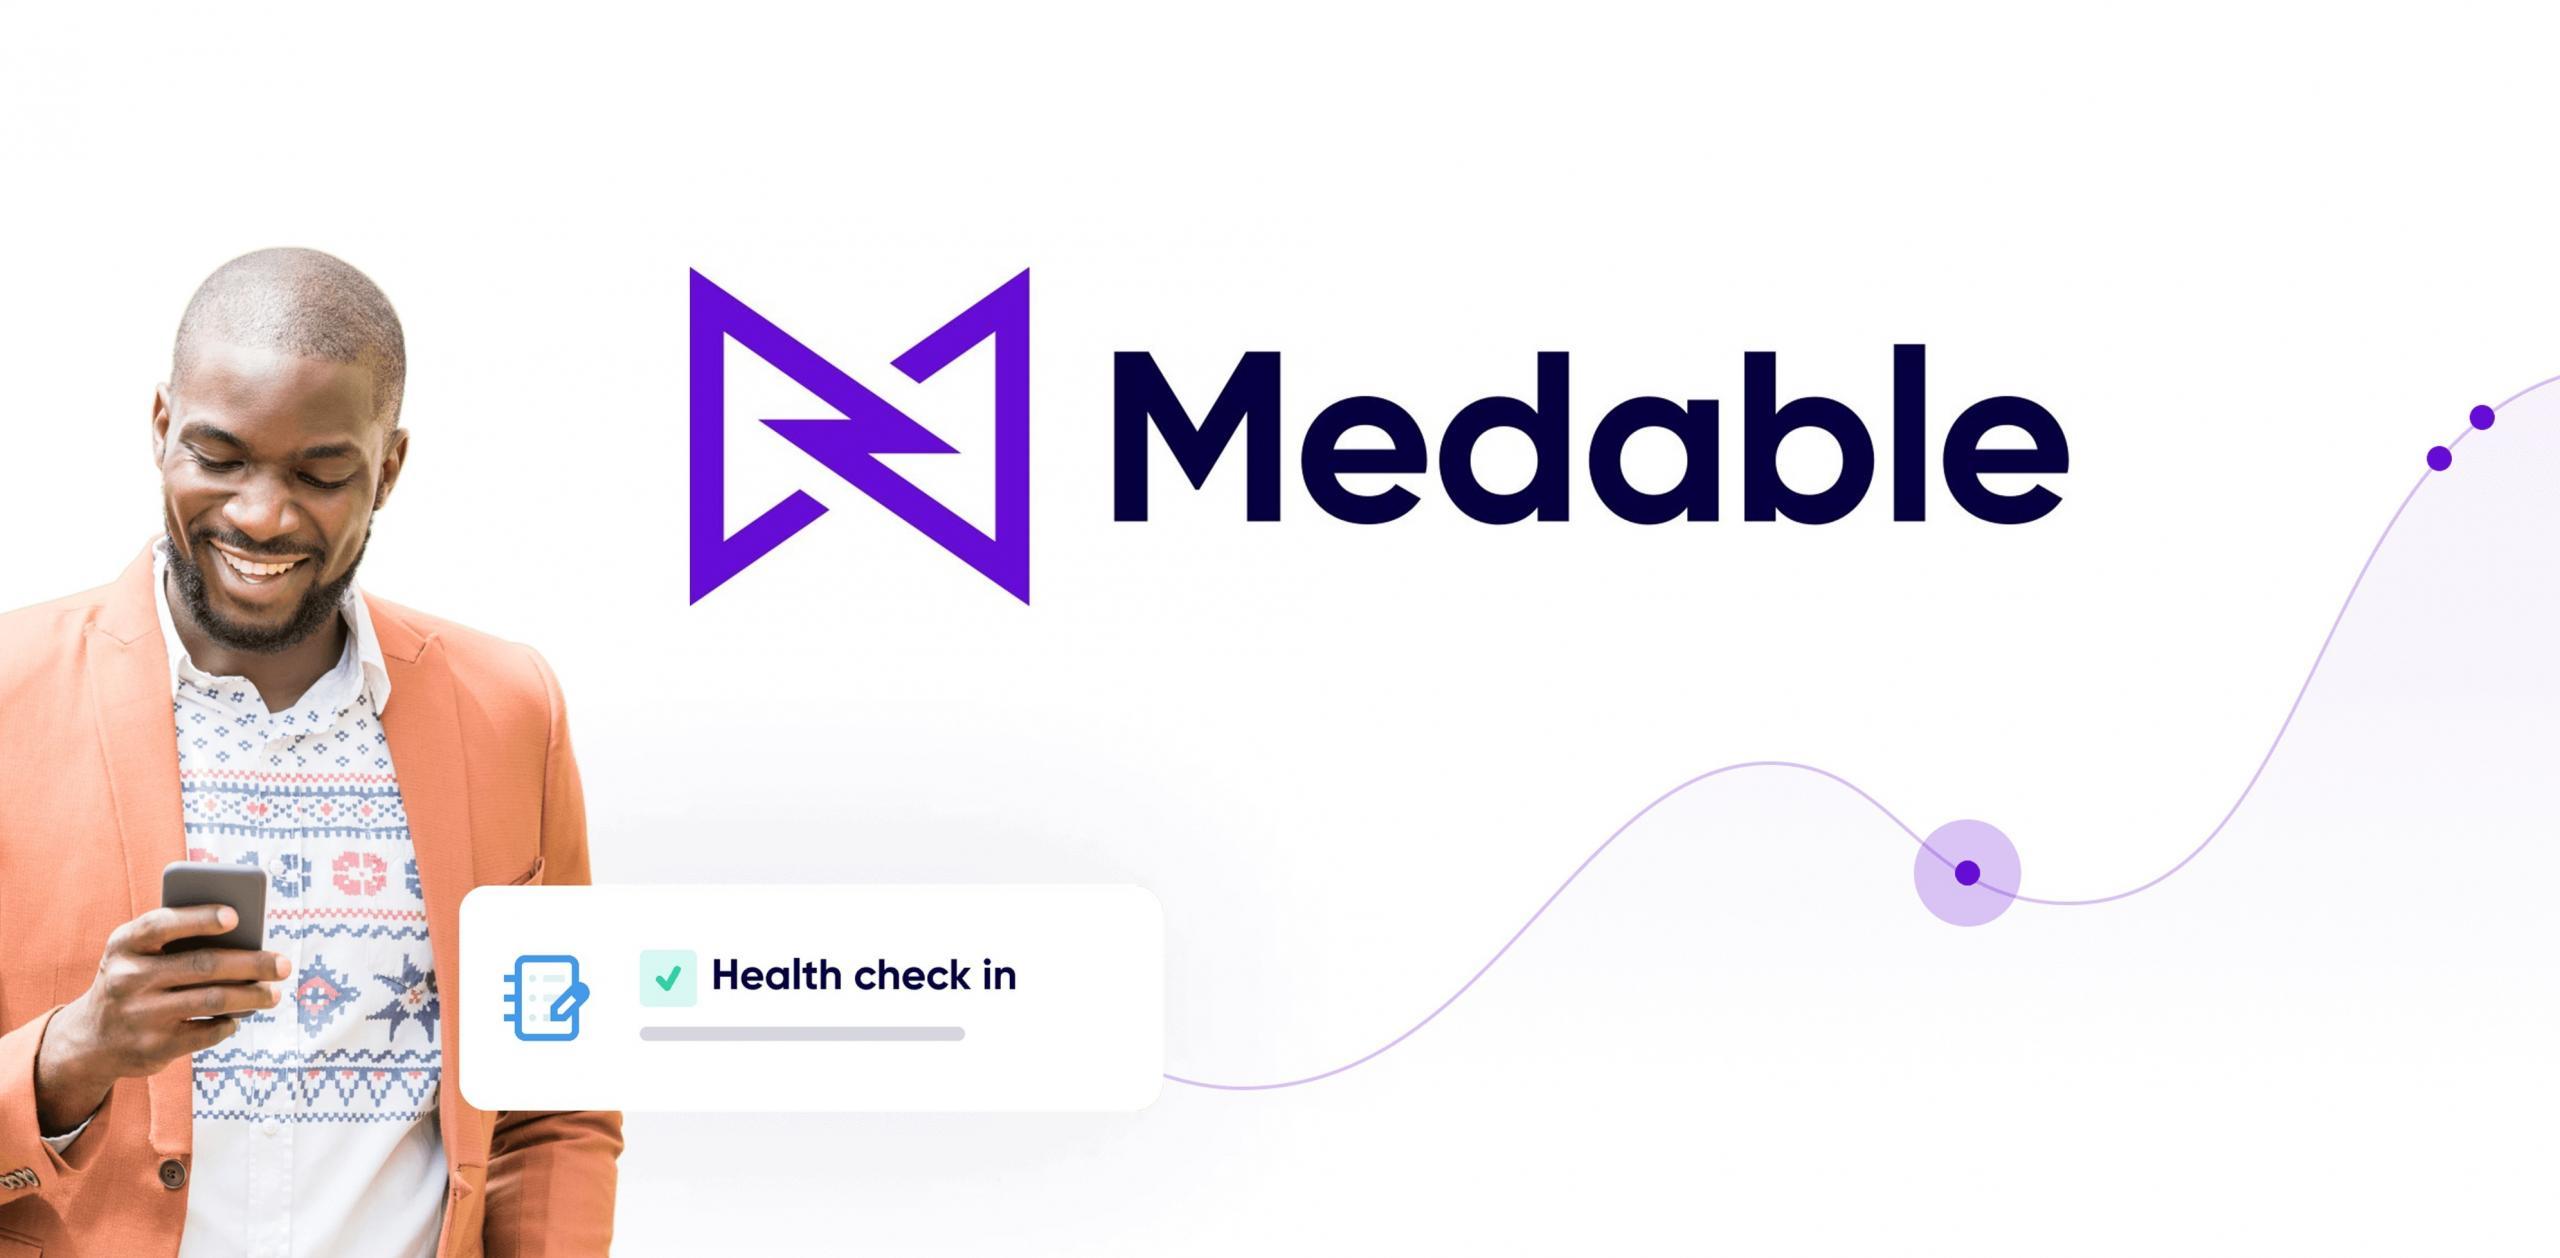 Medable founds branch in Greater Zurich Area